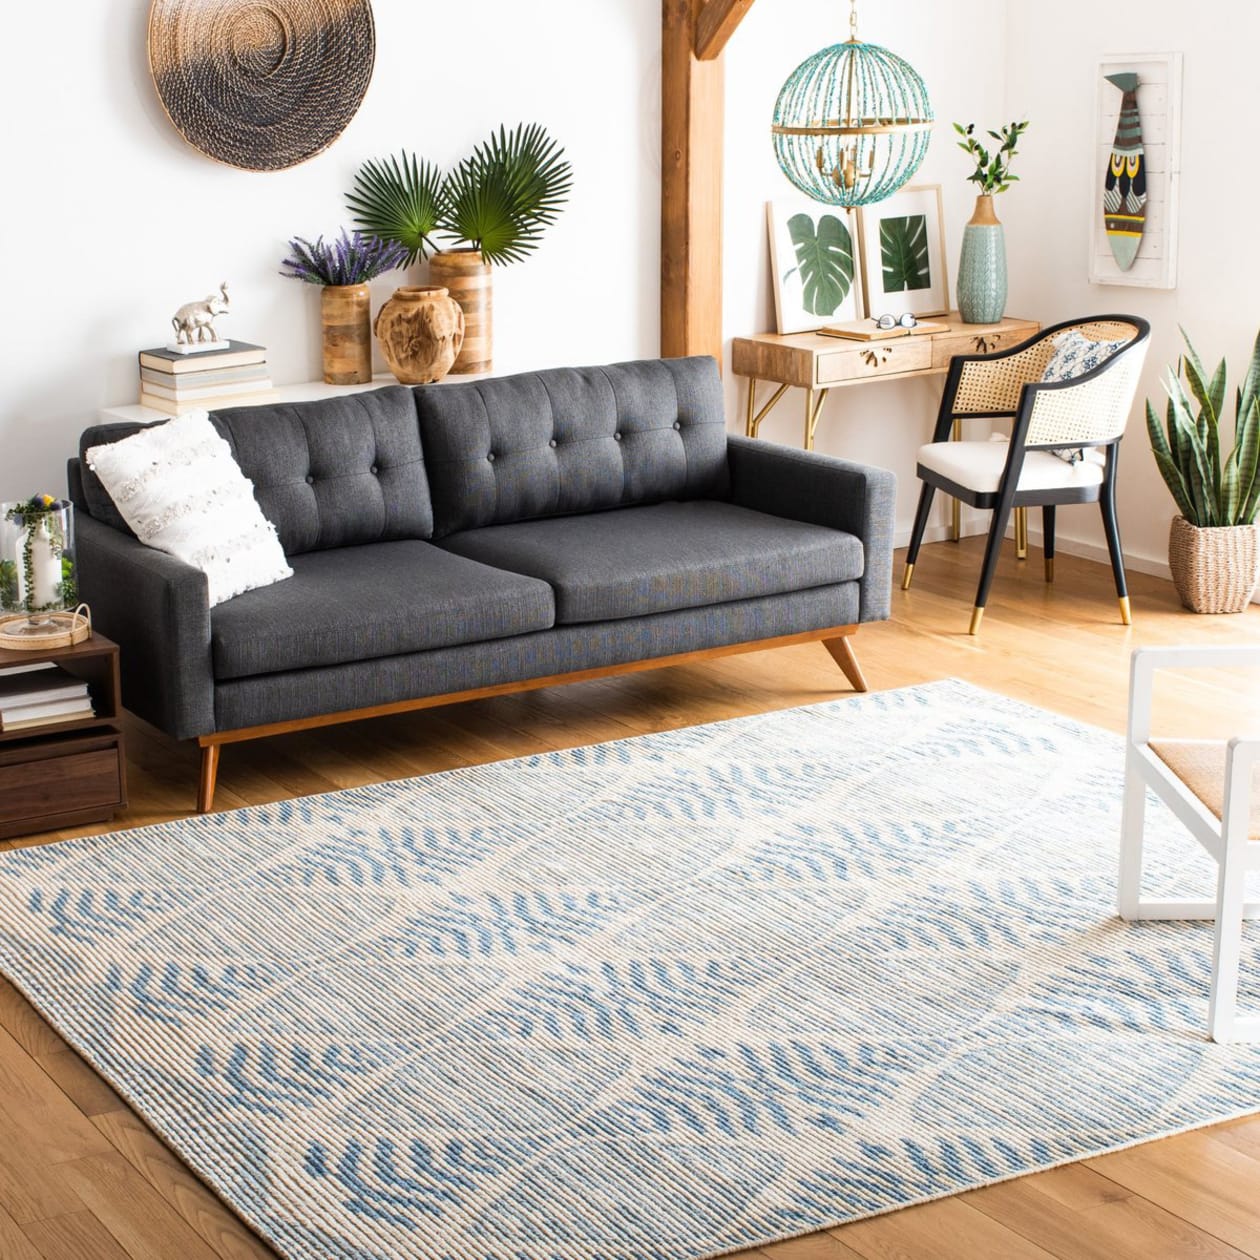 5x8 Wool Rugs: Tie Your Space Together